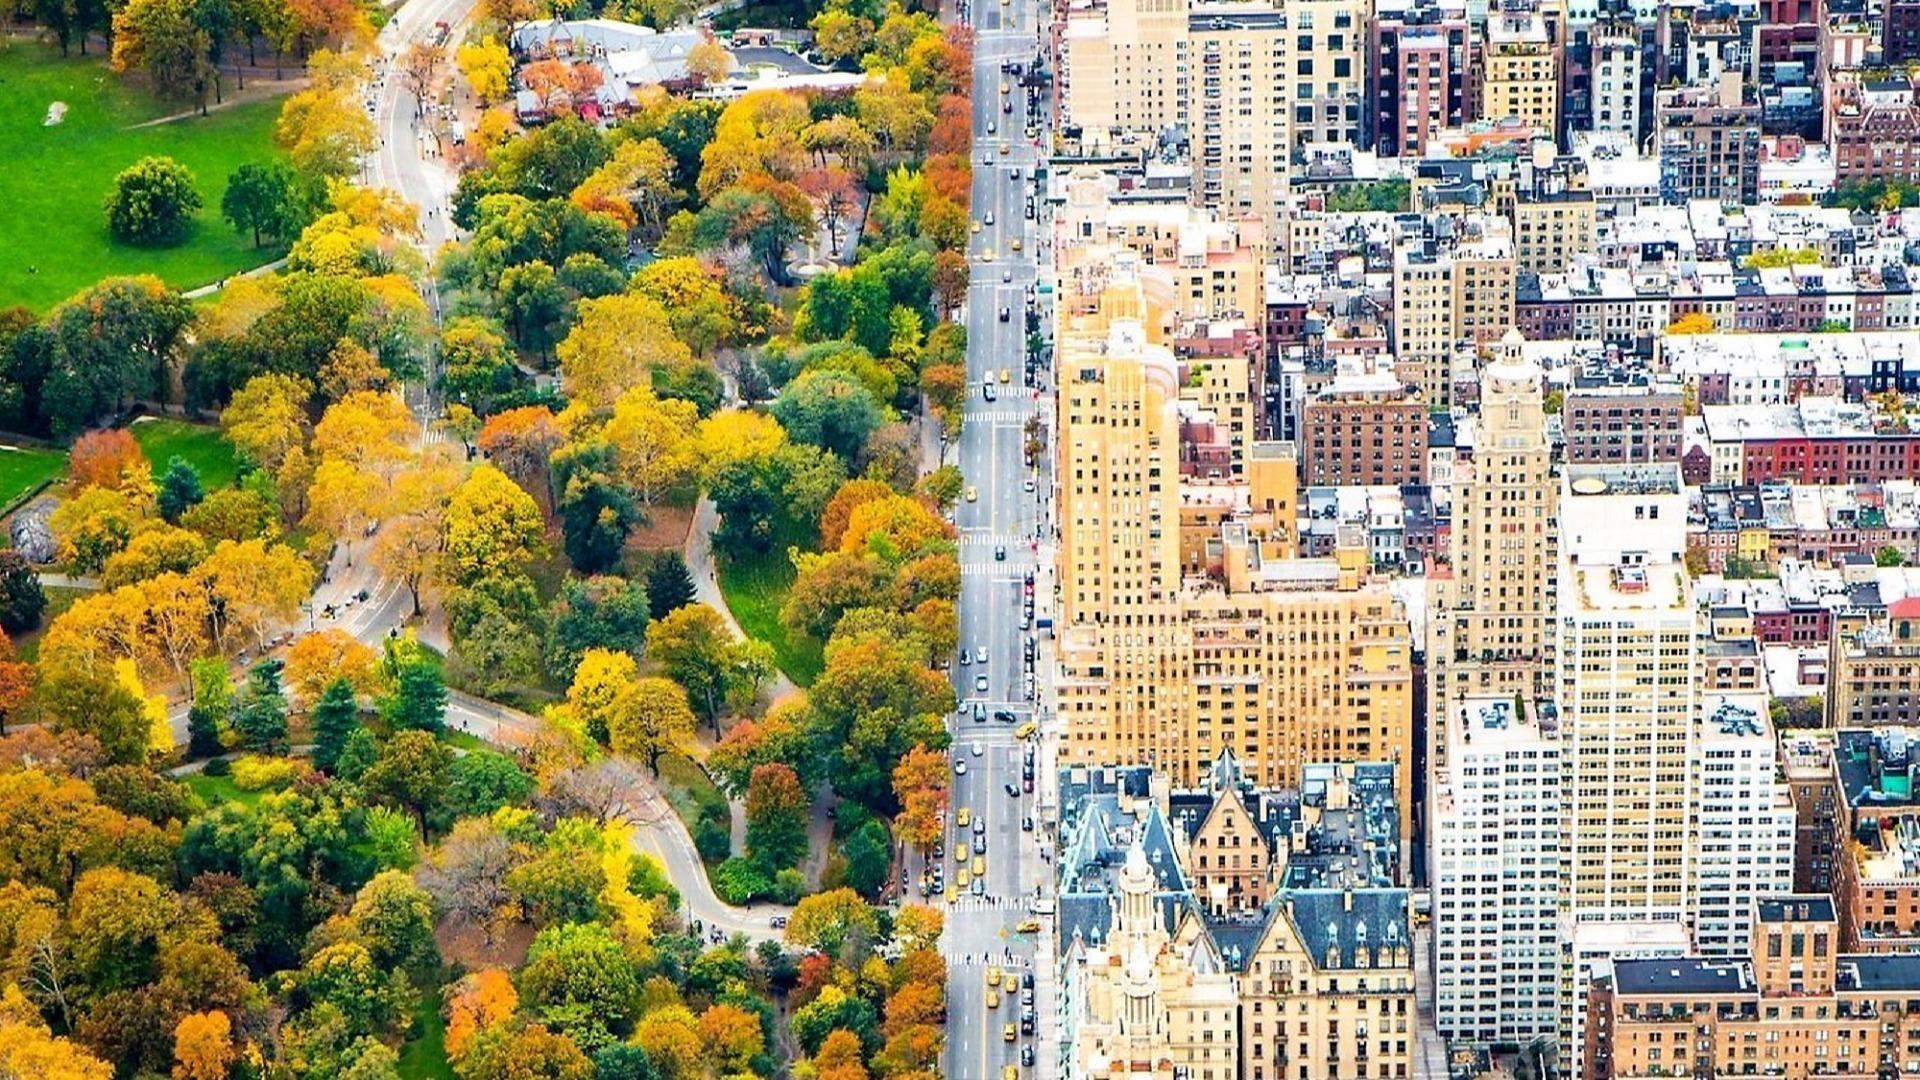 New York And Central Park Aerial View Wallpaper. Wallpaper Studio